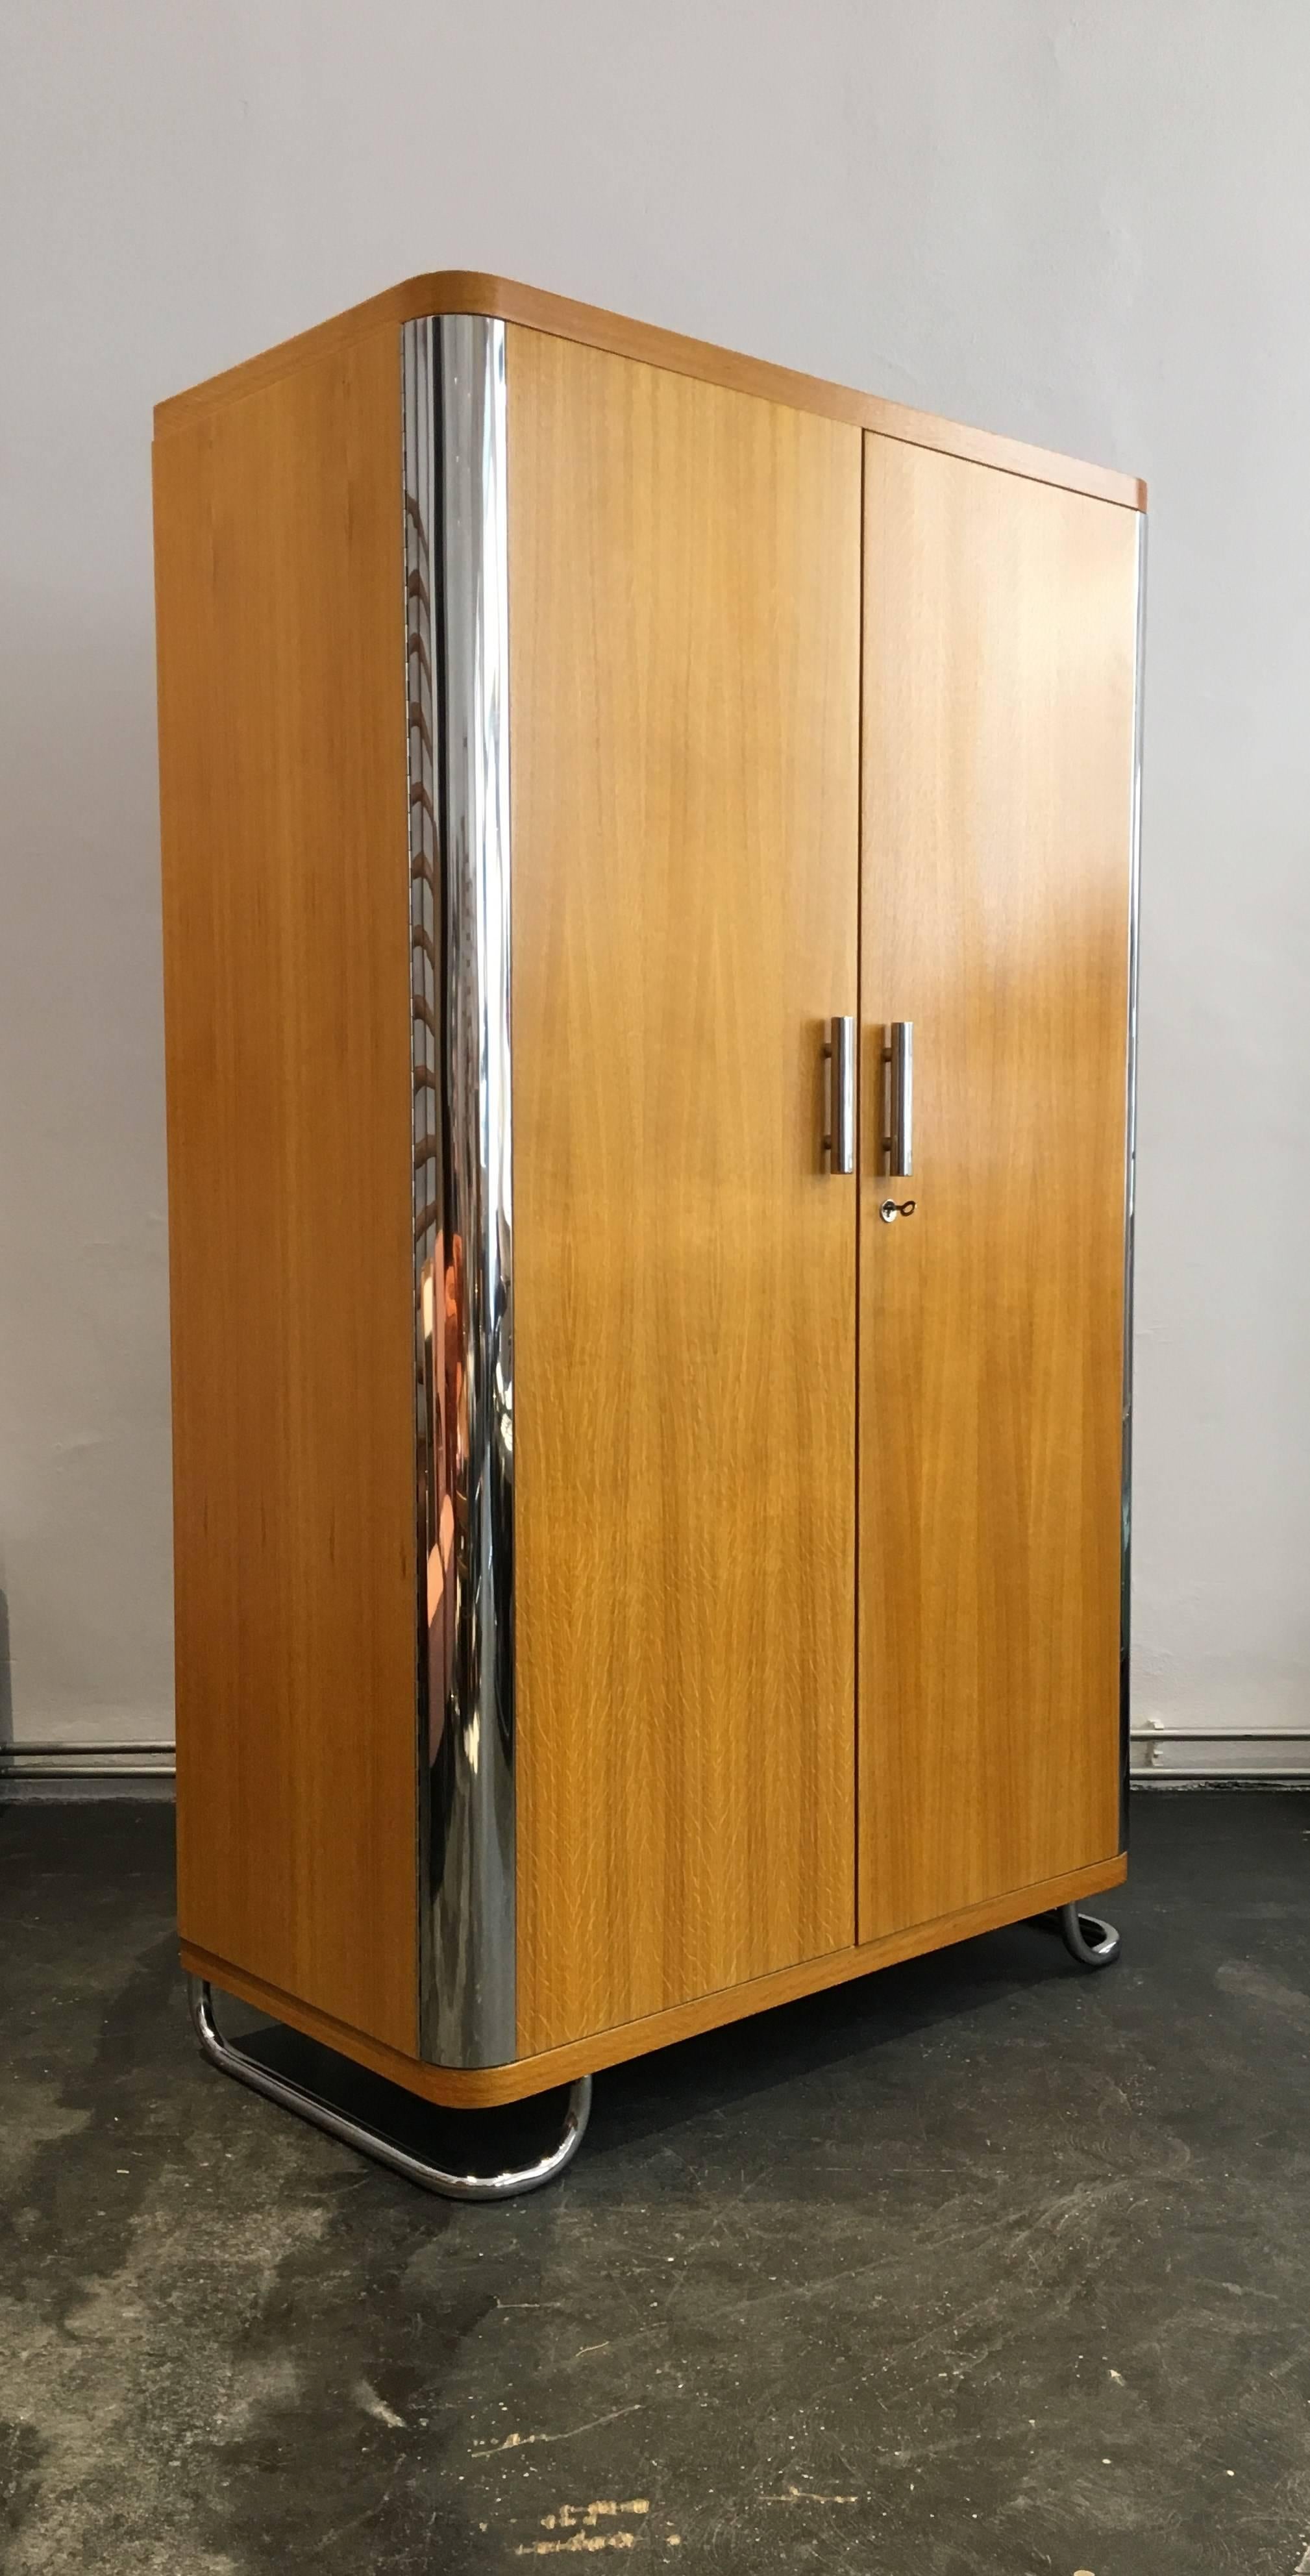 This oak wardrobe in style of Czech functionalism can be ordered as well
in other different colors or veneers. Delivery time 4-6 weeks.
The wardrobe is hand made in a very good quality. Other measures are possible.

We offer shop to door